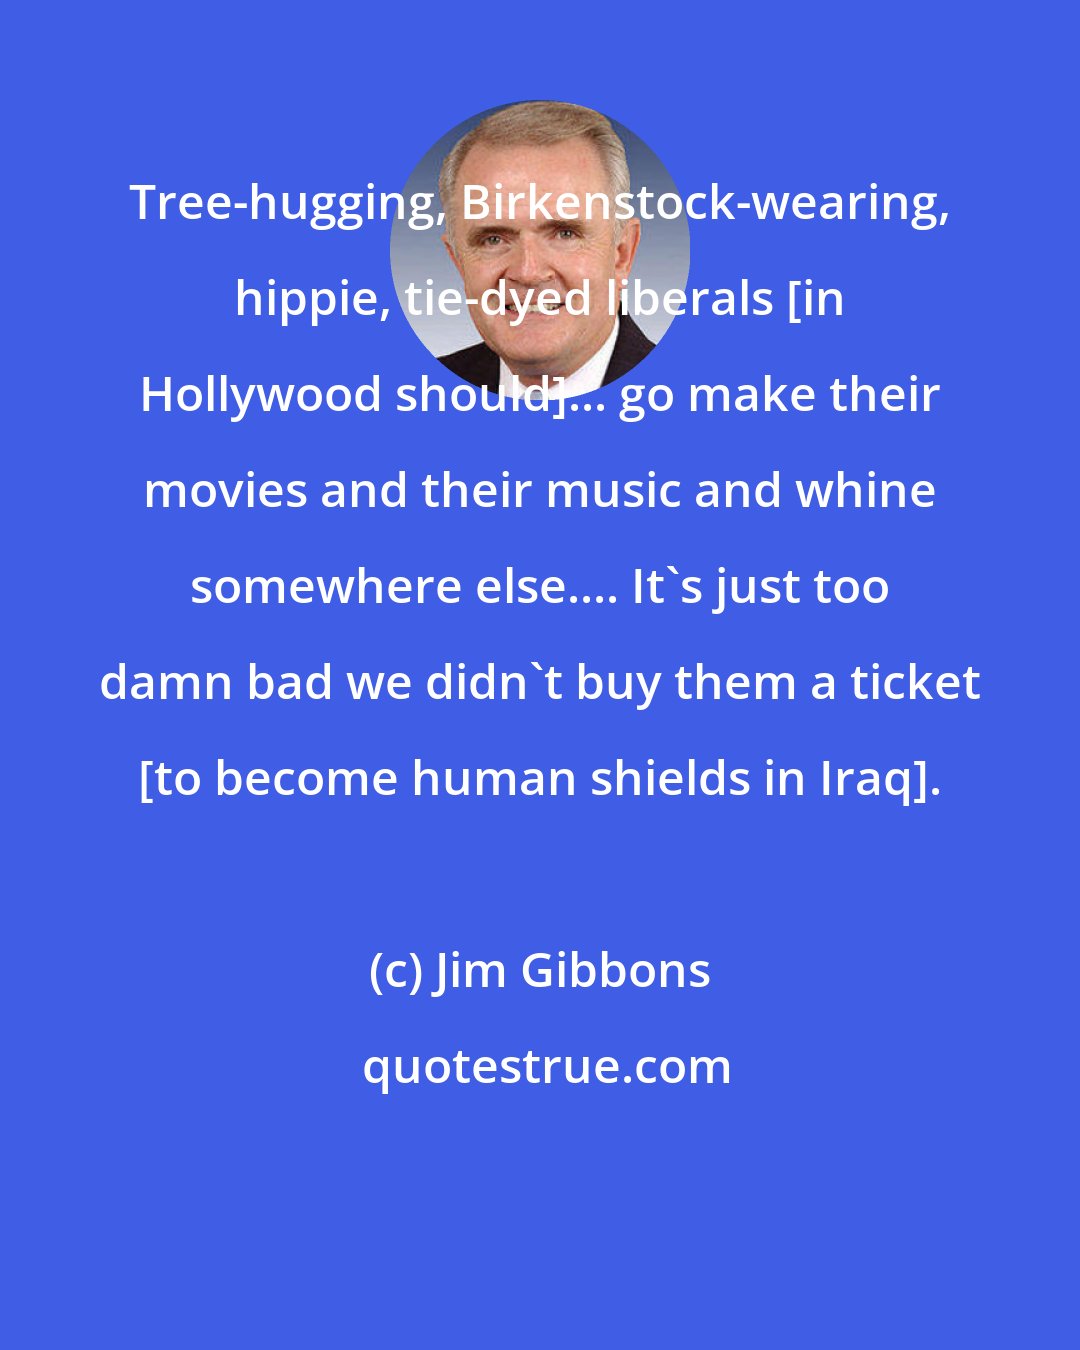 Jim Gibbons: Tree-hugging, Birkenstock-wearing, hippie, tie-dyed liberals [in Hollywood should]... go make their movies and their music and whine somewhere else.... It's just too damn bad we didn't buy them a ticket [to become human shields in Iraq].